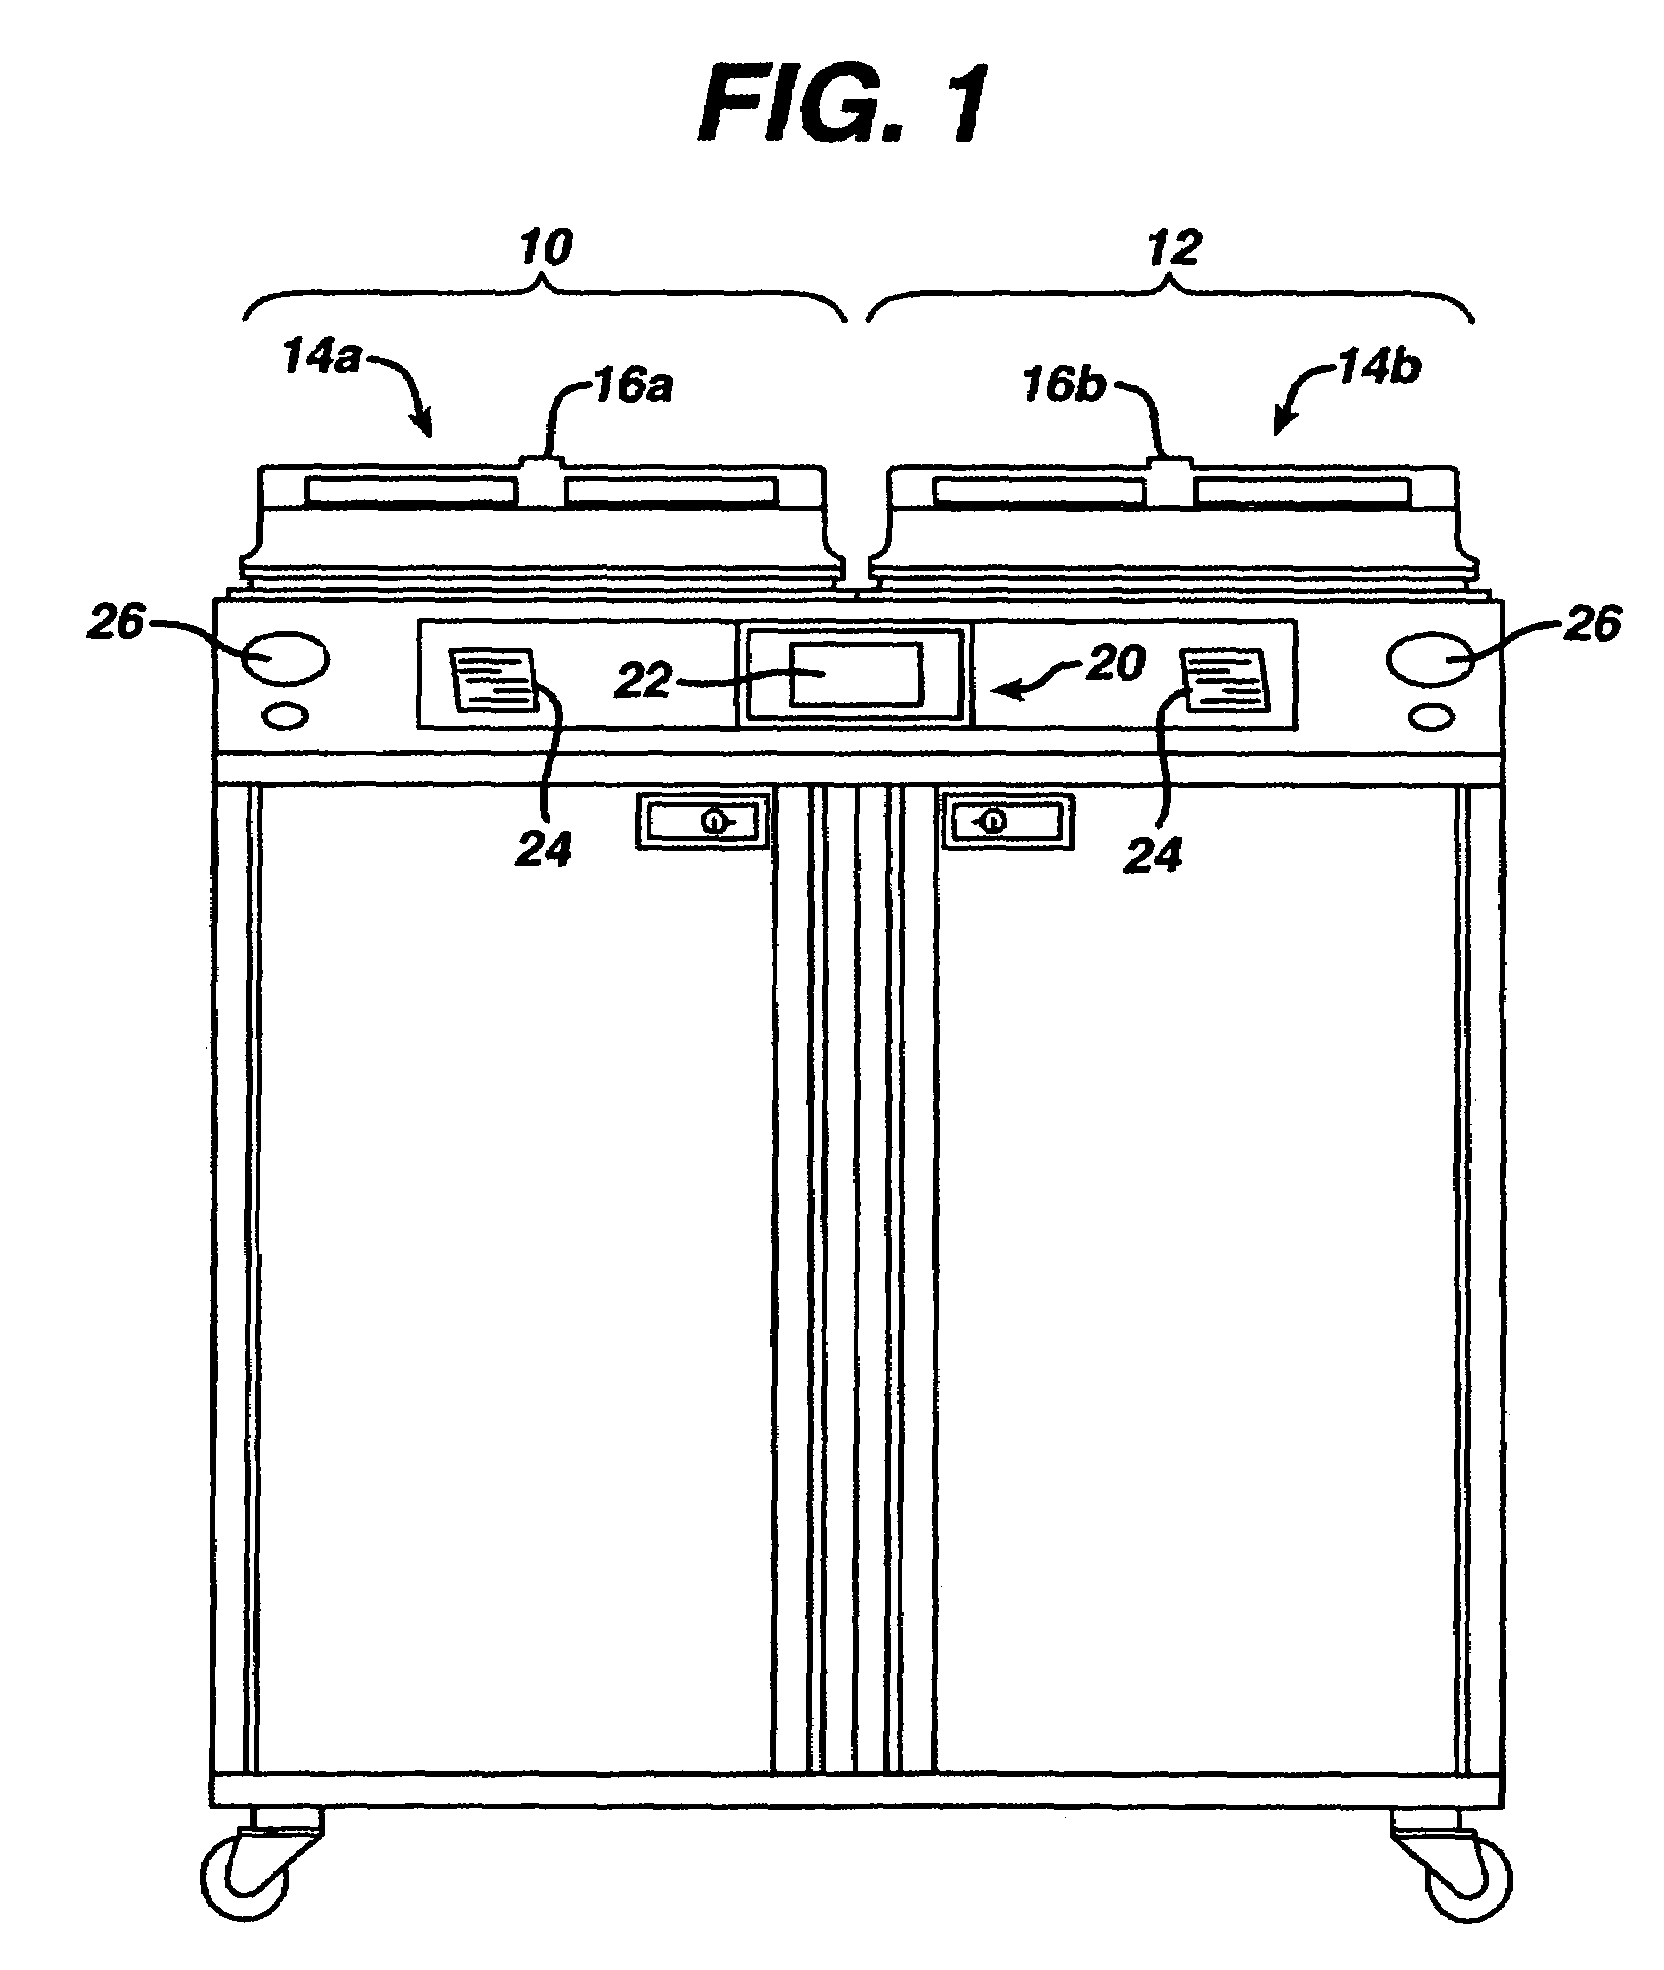 Method of detecting proper connection of an endoscope to an endoscope processor